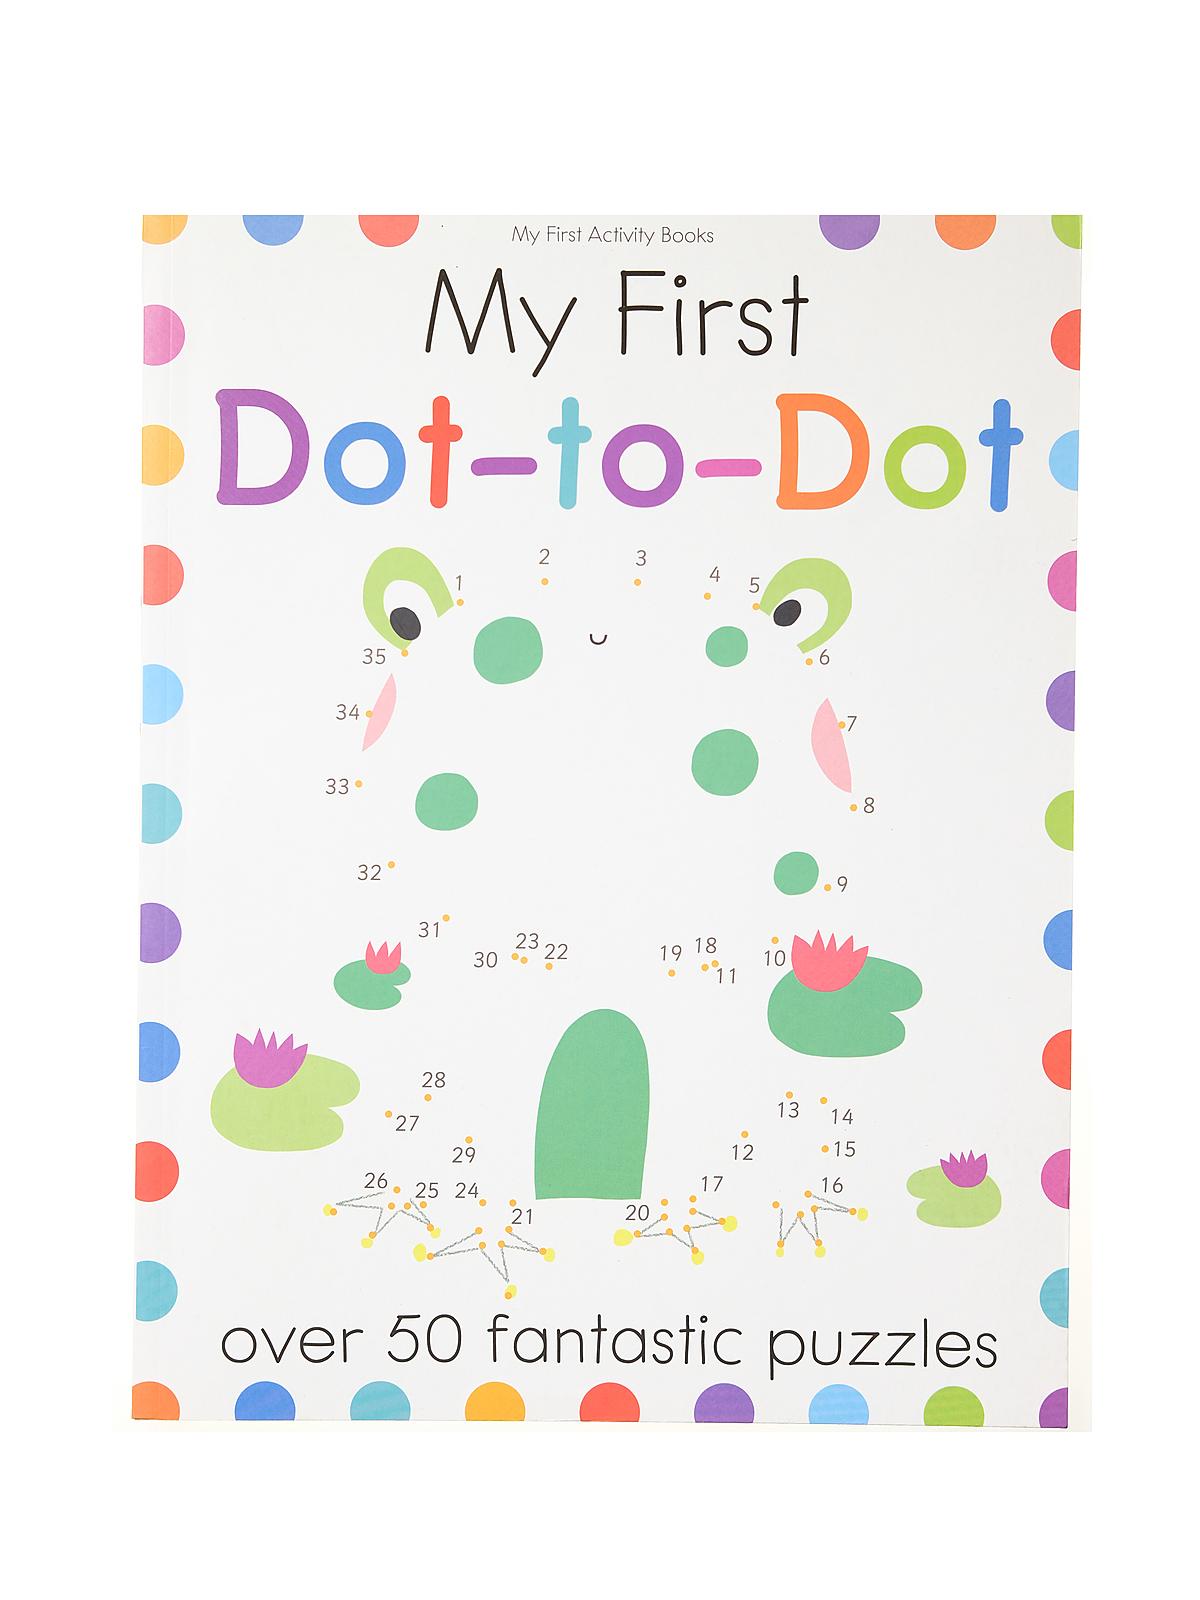 My First Activity Book Dot-to-dot